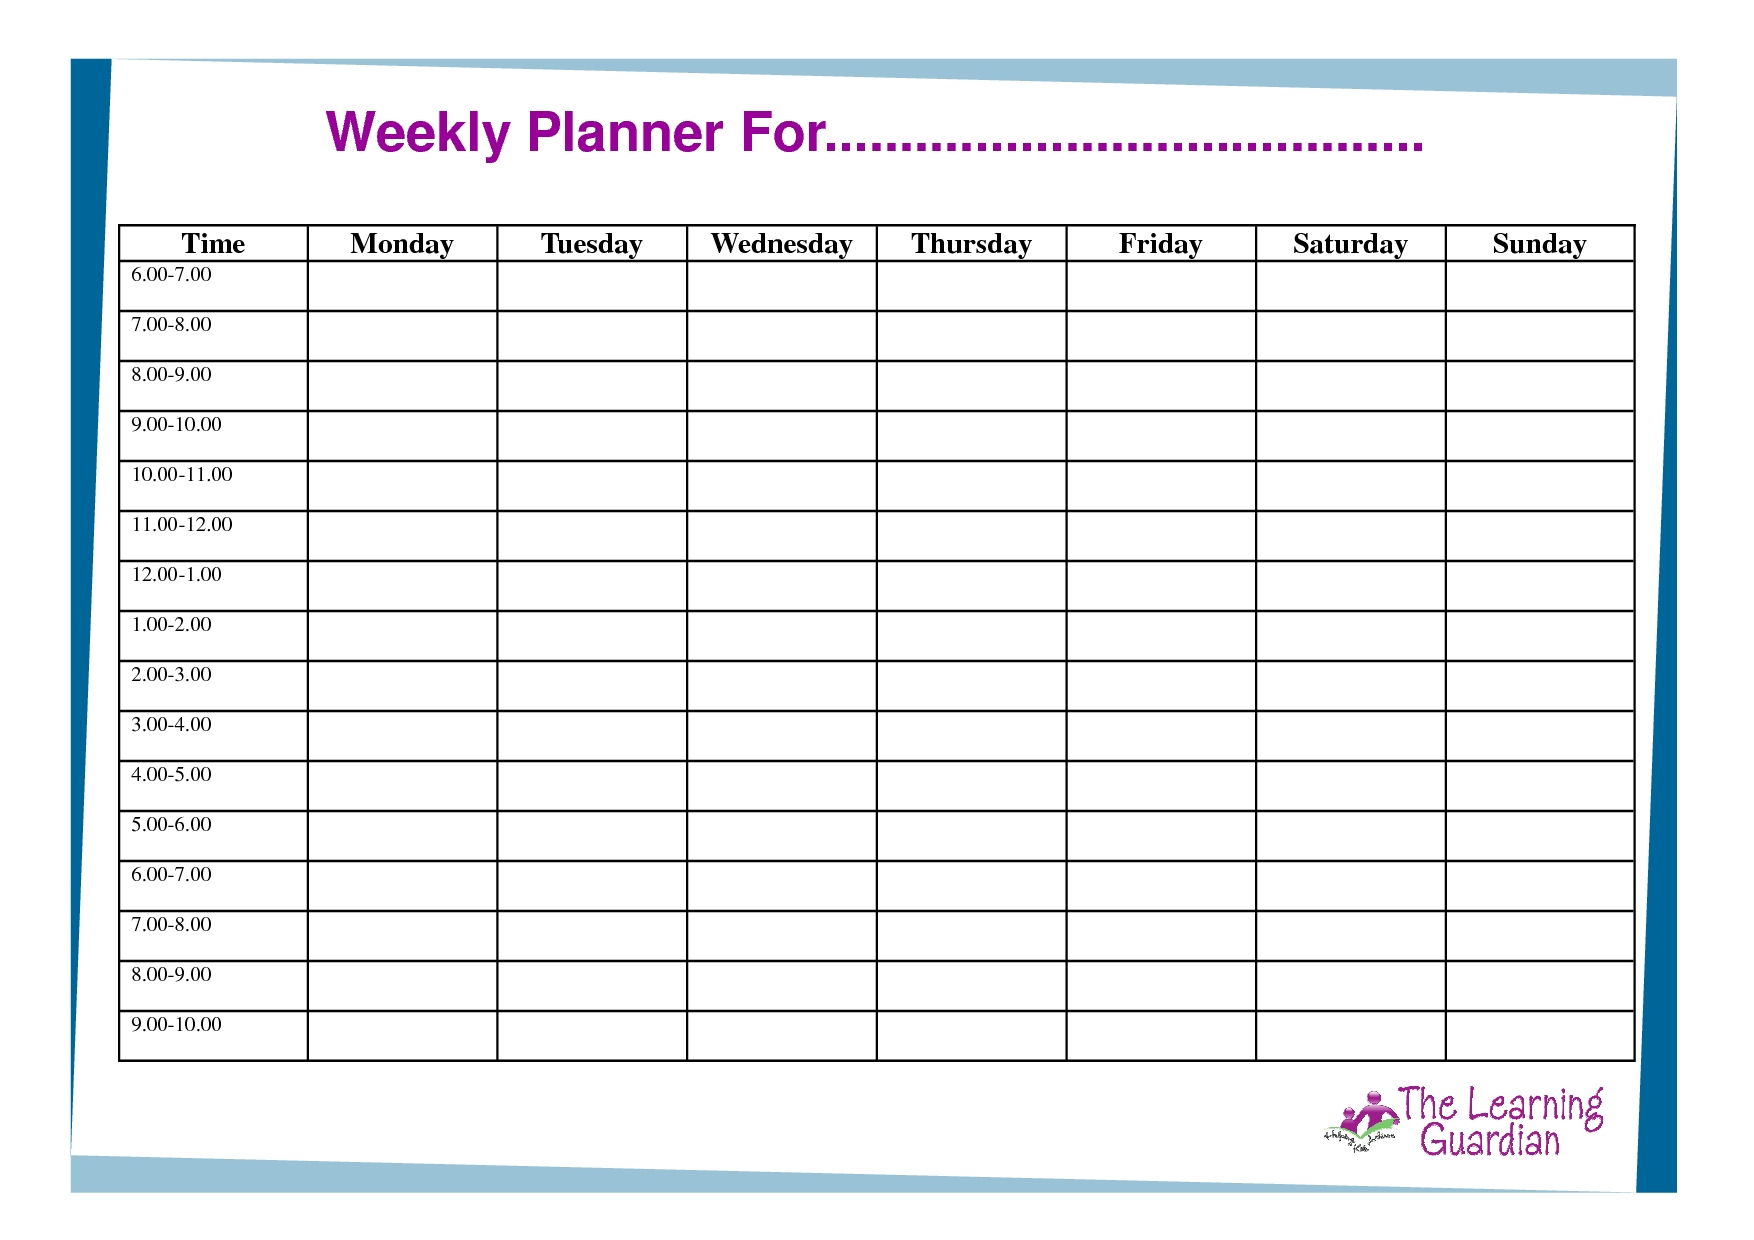 Weekly Planner With Time Slots Word Template Calendar